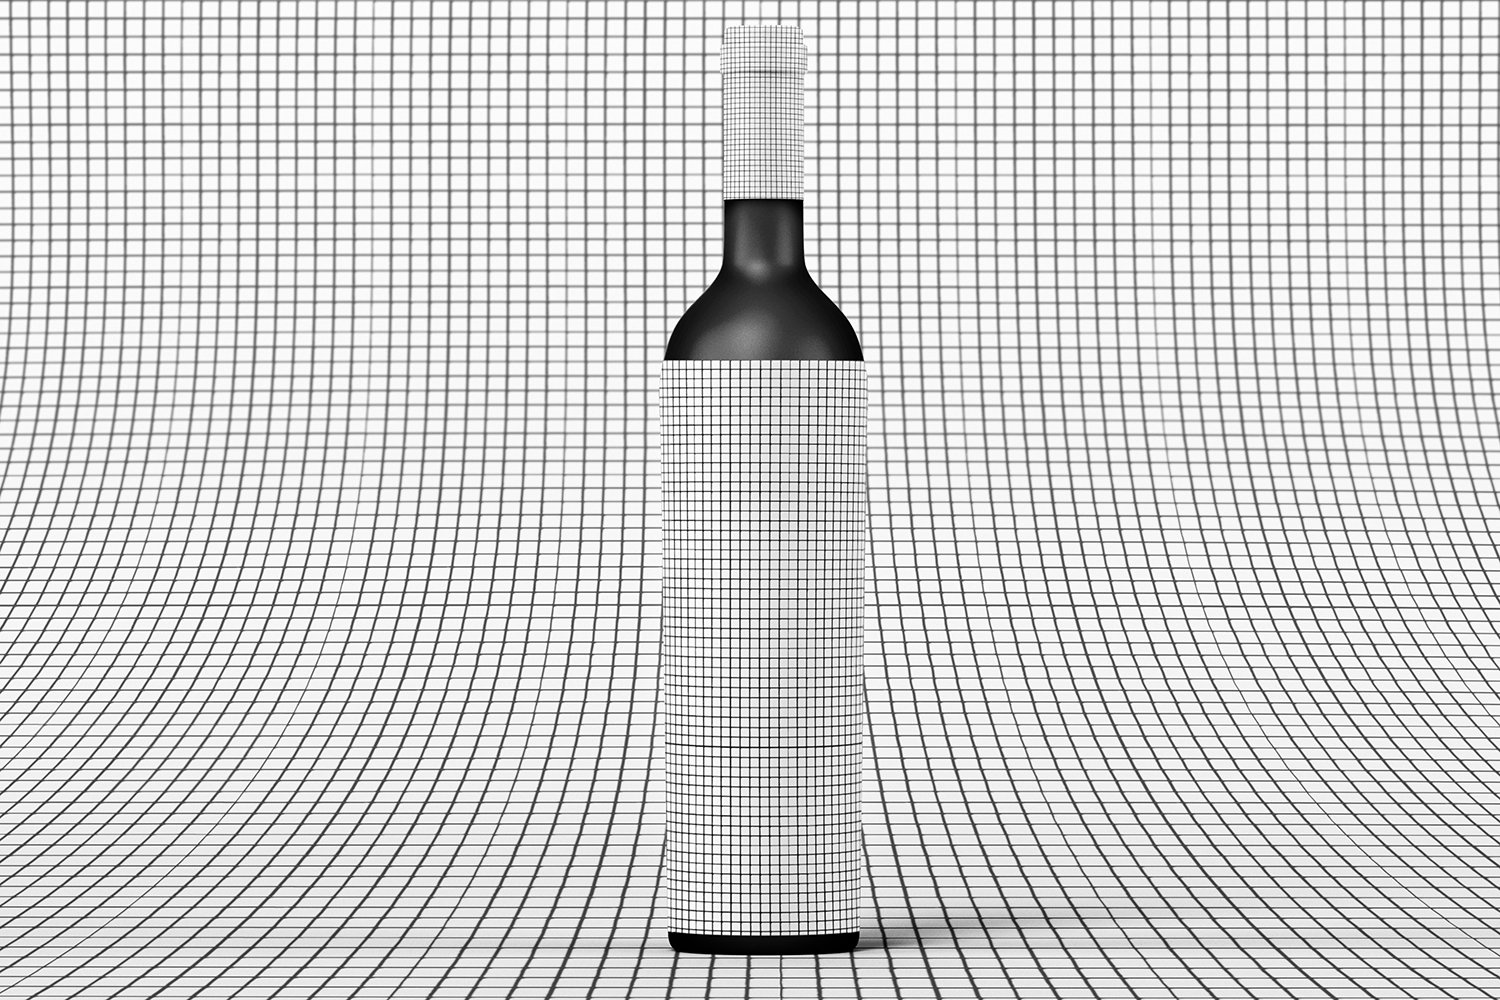 White label with black prints for wine bottle.